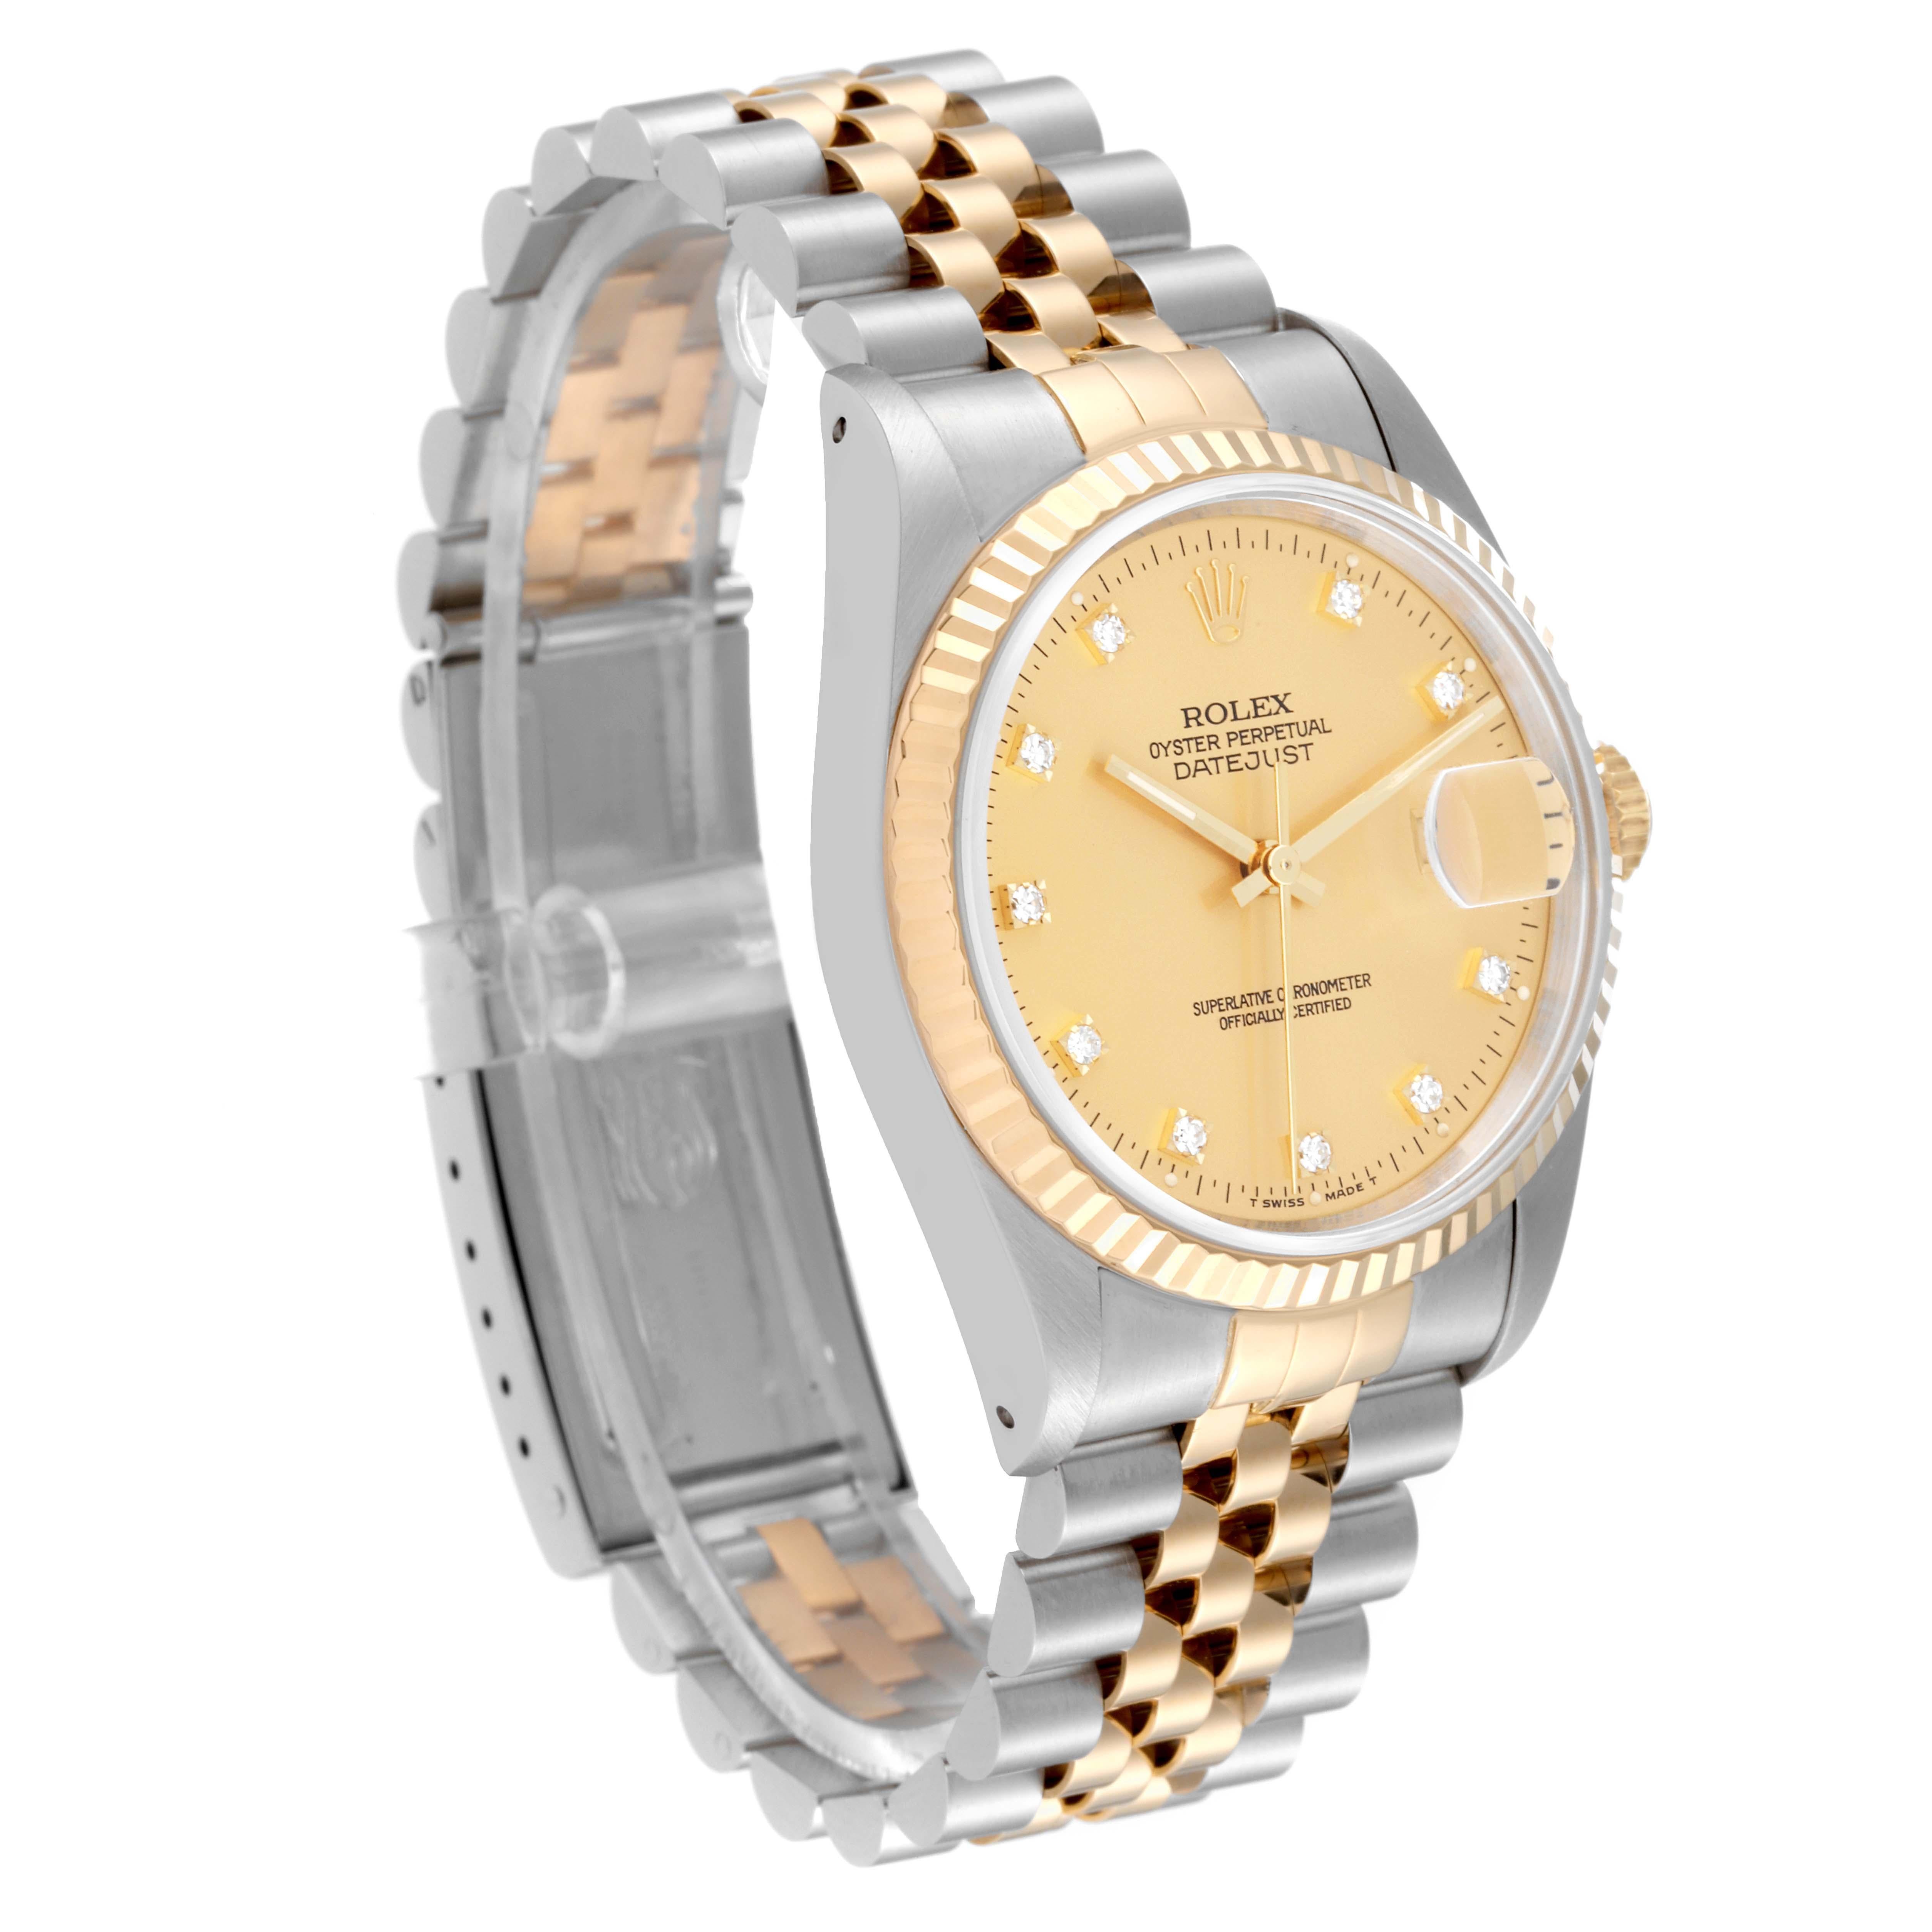 Rolex Datejust Champagne Diamond Dial Steel Yellow Gold Mens Watch 16233 In Excellent Condition For Sale In Atlanta, GA